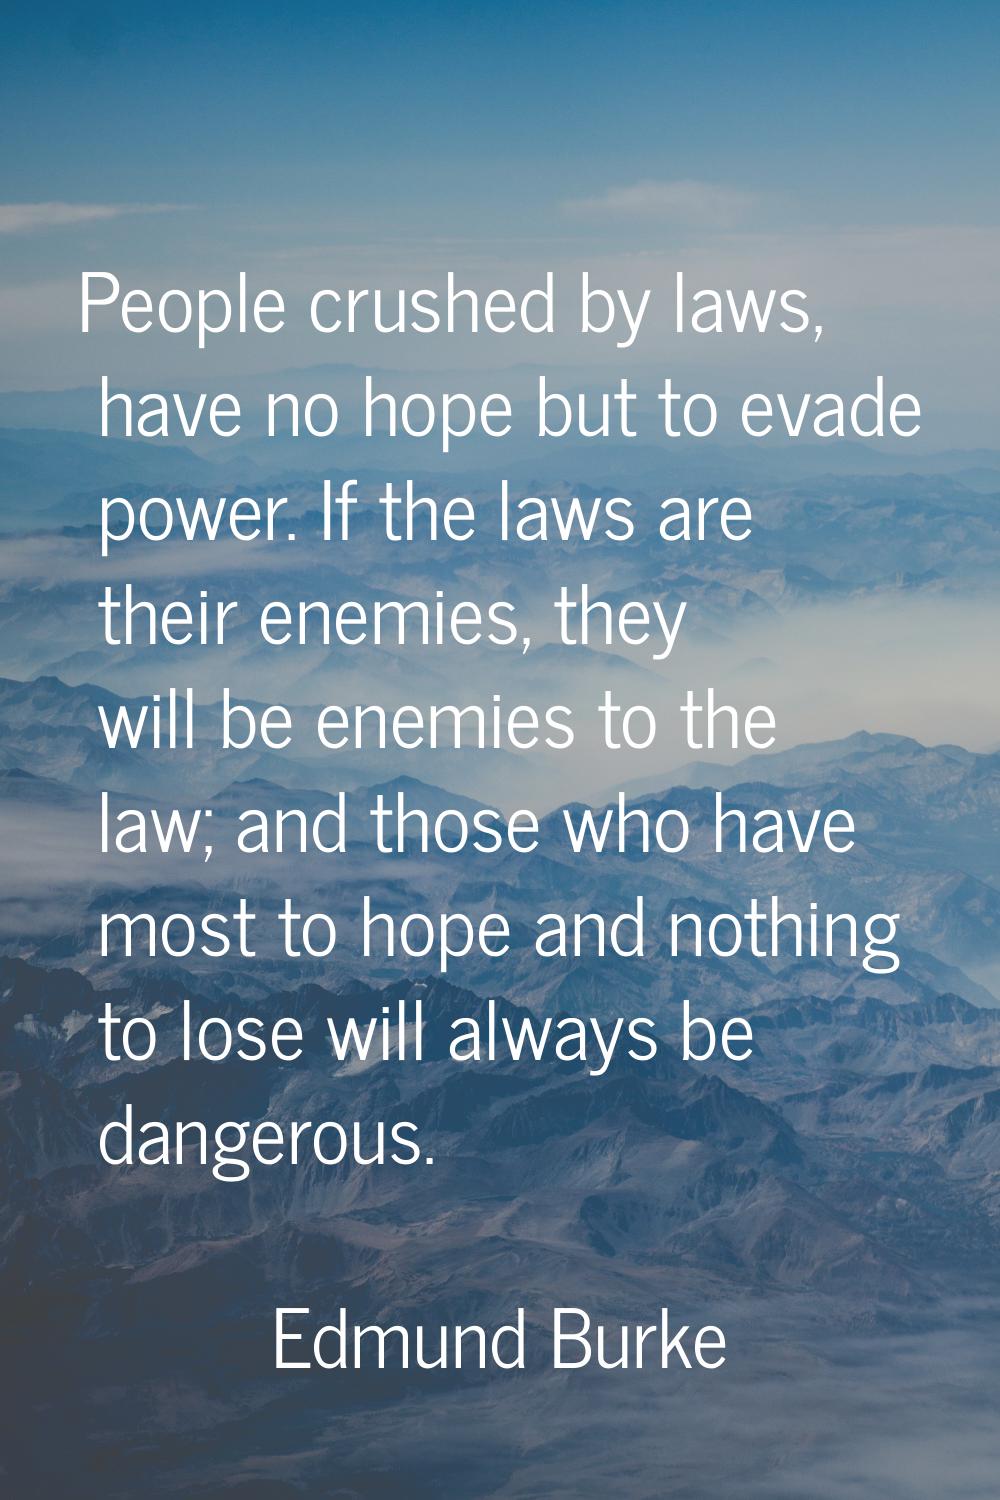 People crushed by laws, have no hope but to evade power. If the laws are their enemies, they will b